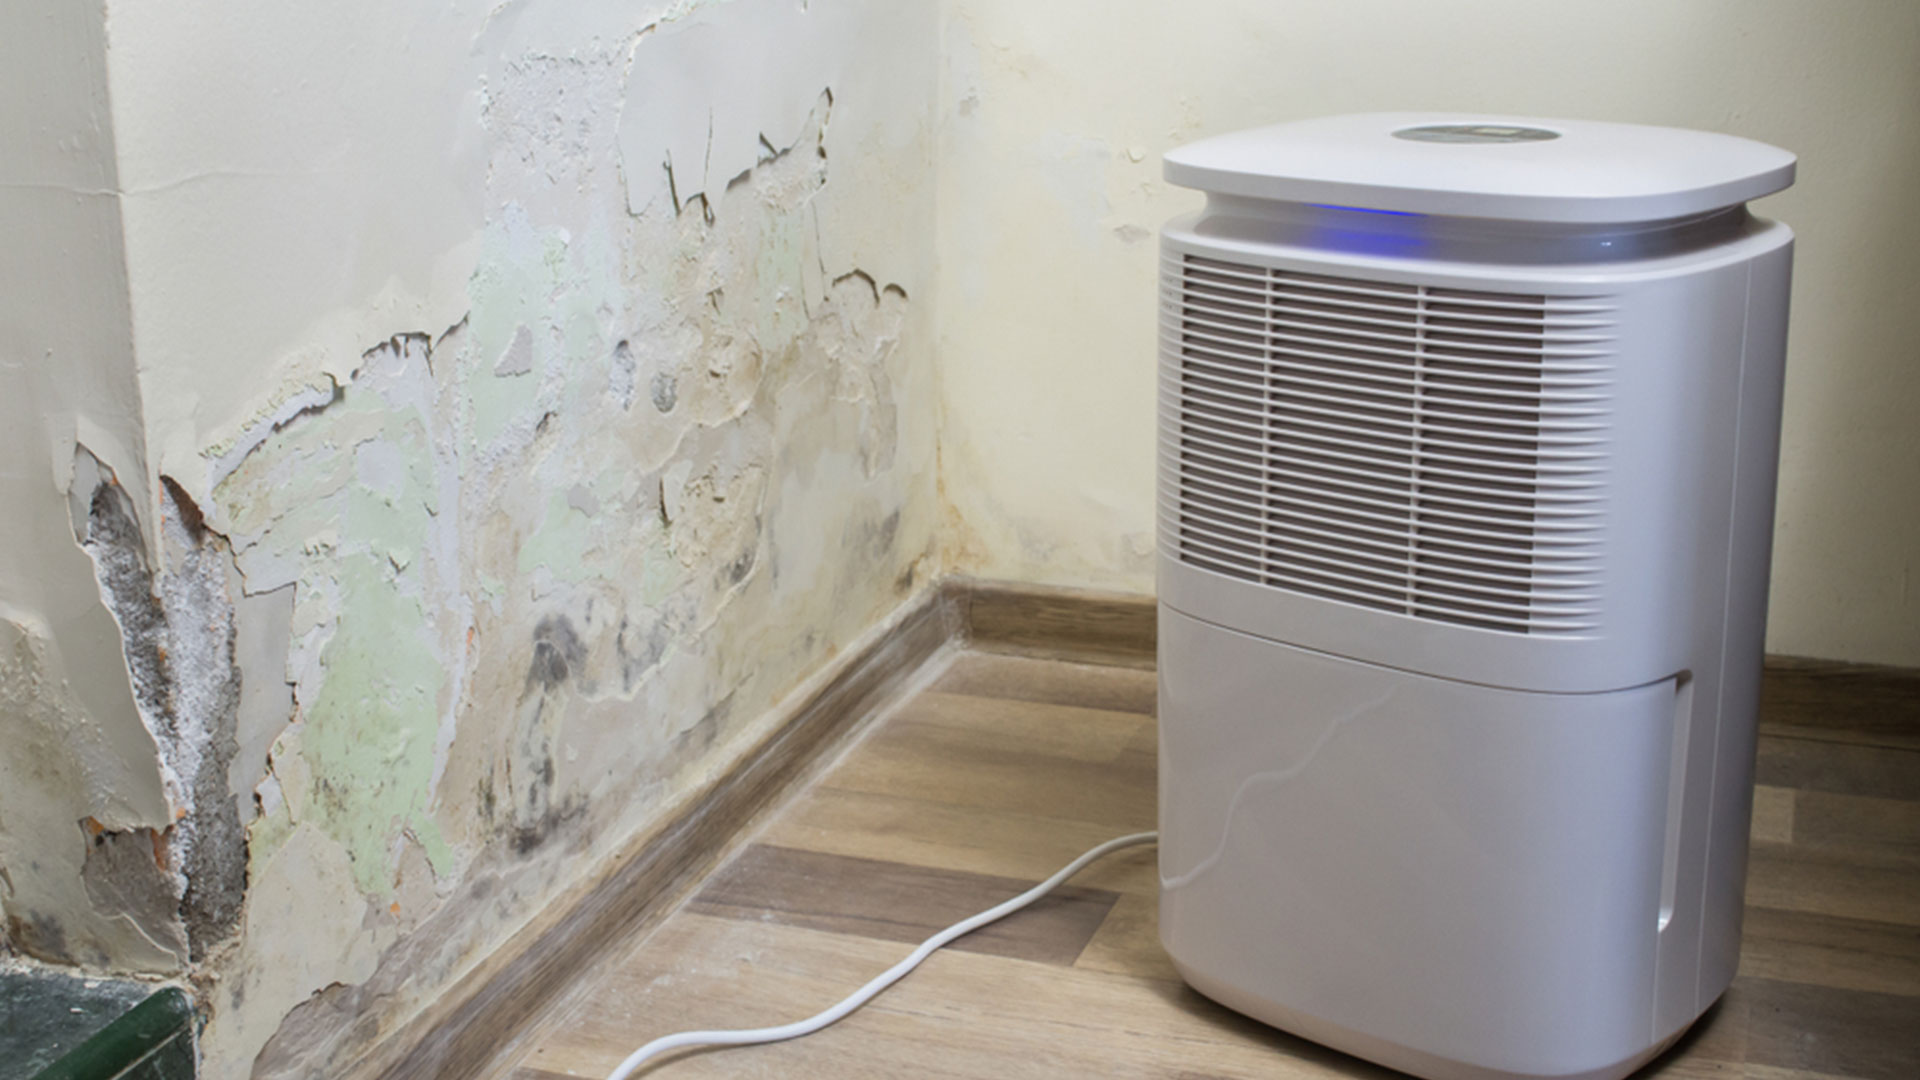 Dehumidifer being used to prevent mold